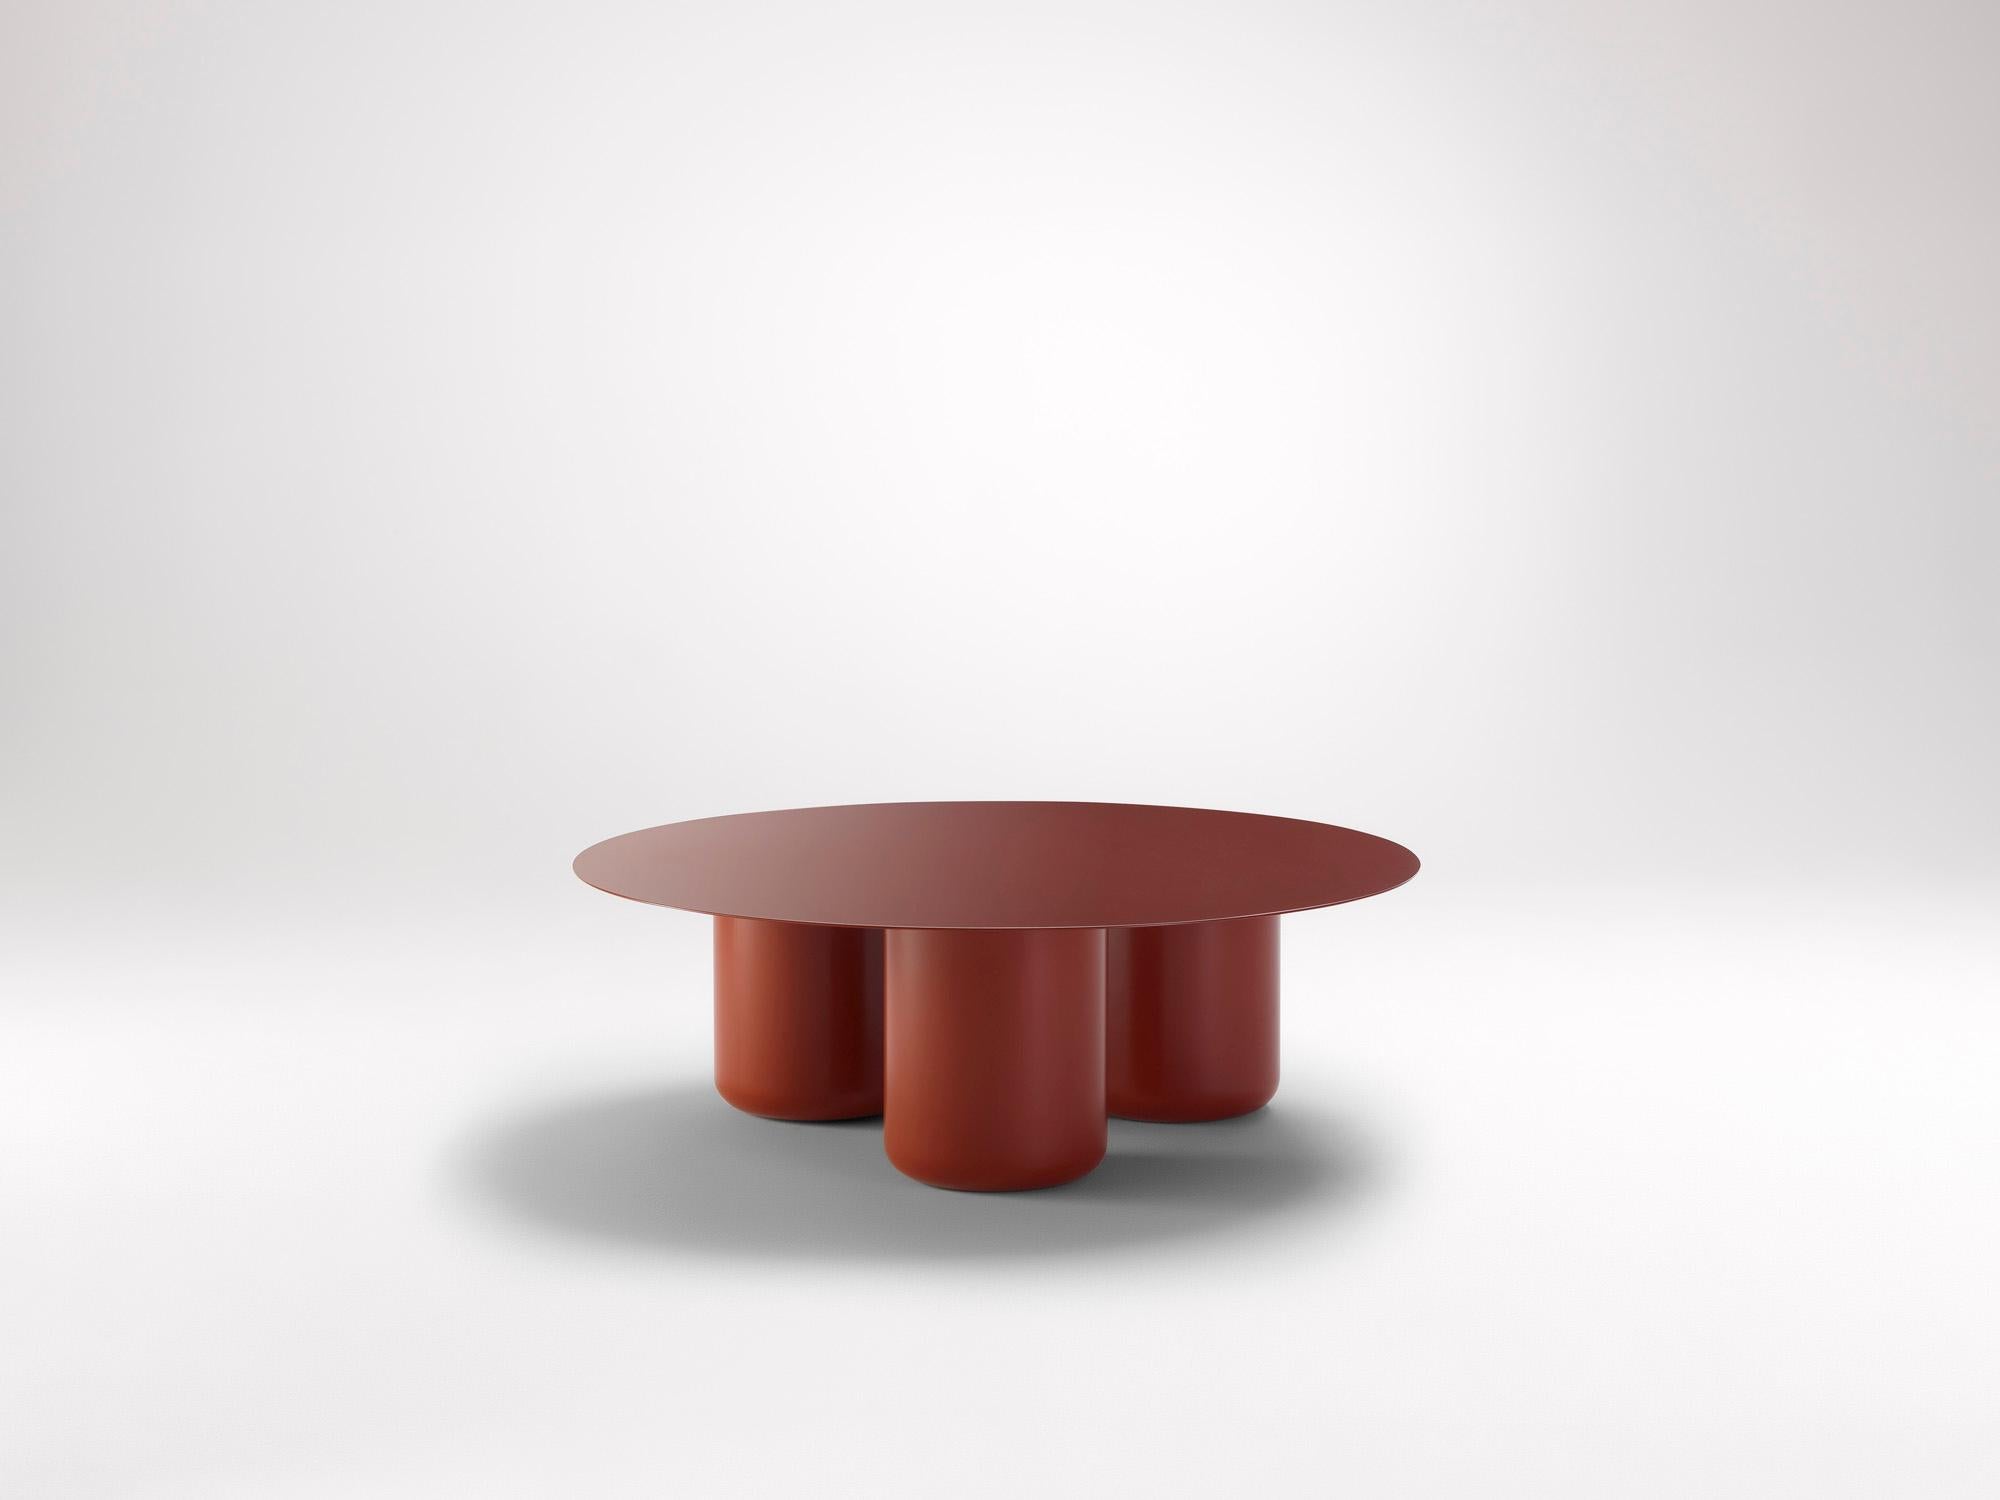 Headland Red Round Table by Coco Flip
Dimensions: D 100 x H 32 / 36 / 40 / 42 cm
Materials: Mild steel, powder-coated with zinc undercoat. 
Weight: 34 kg

Coco Flip is a Melbourne based furniture and lighting design studio, run by us, Kate Stokes